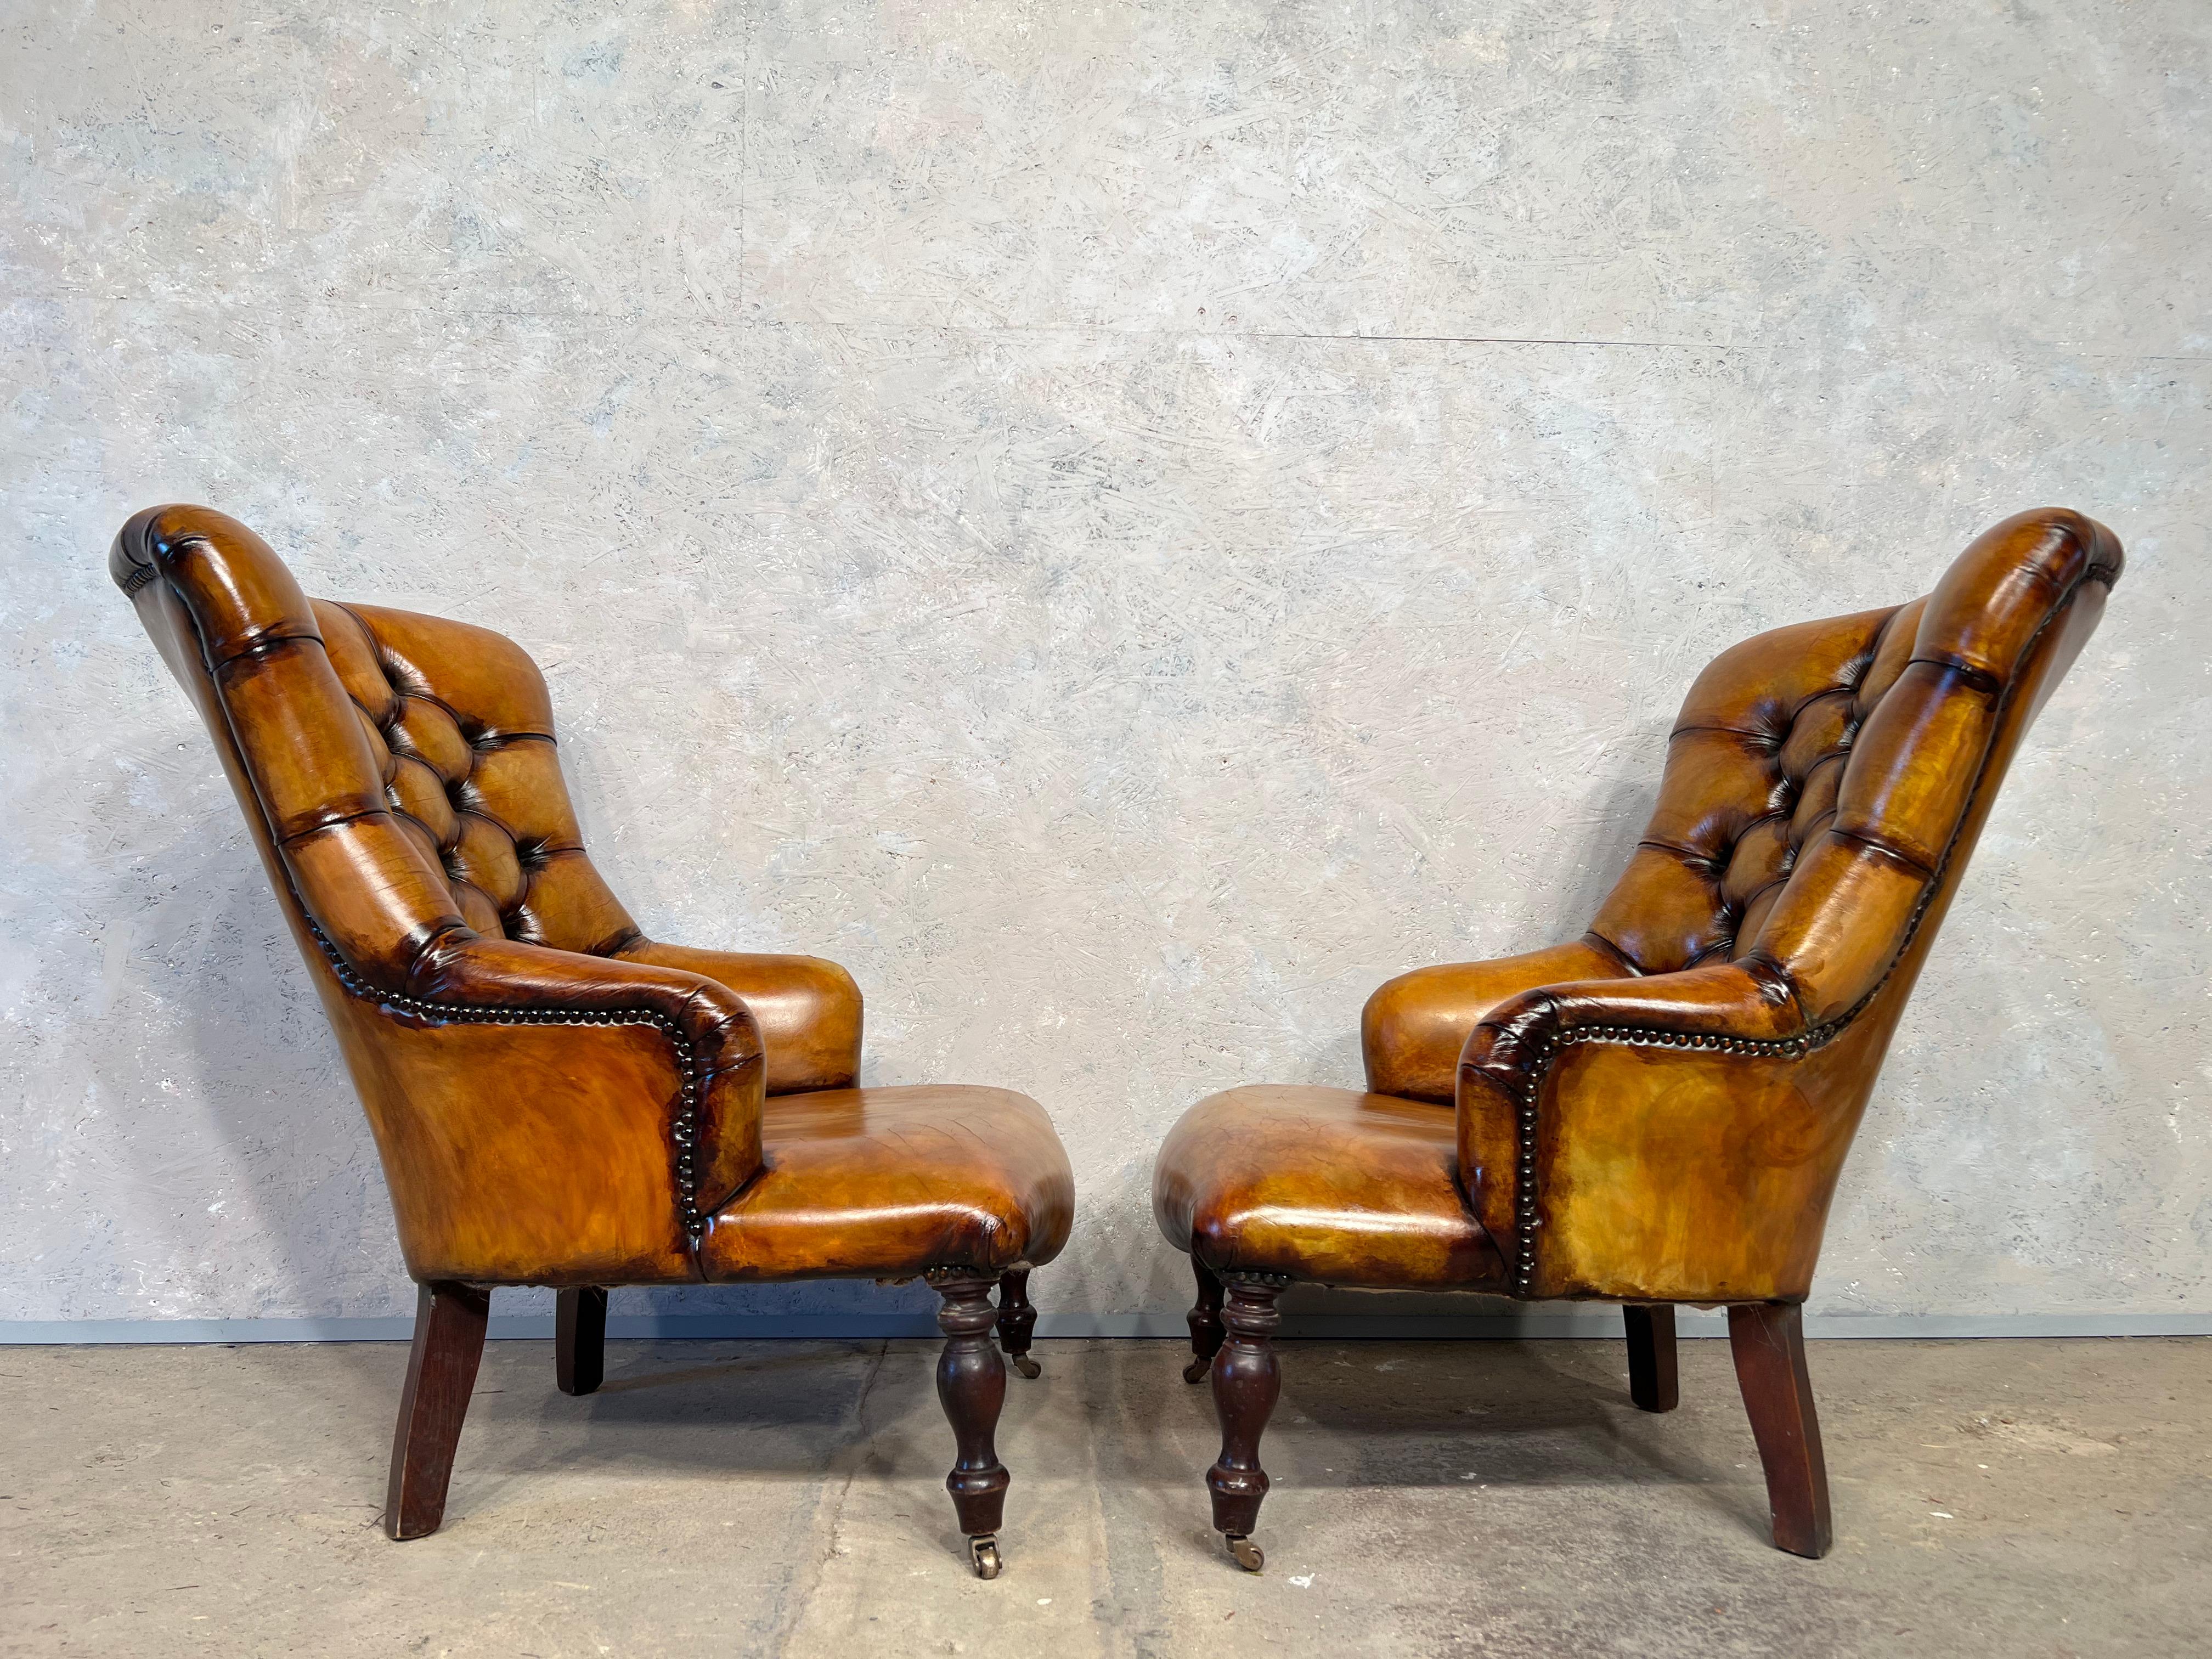 20th Century Pair of Leather Fireside Chairs Chesterfield Antique Tan Colour Mid-Century #391 For Sale